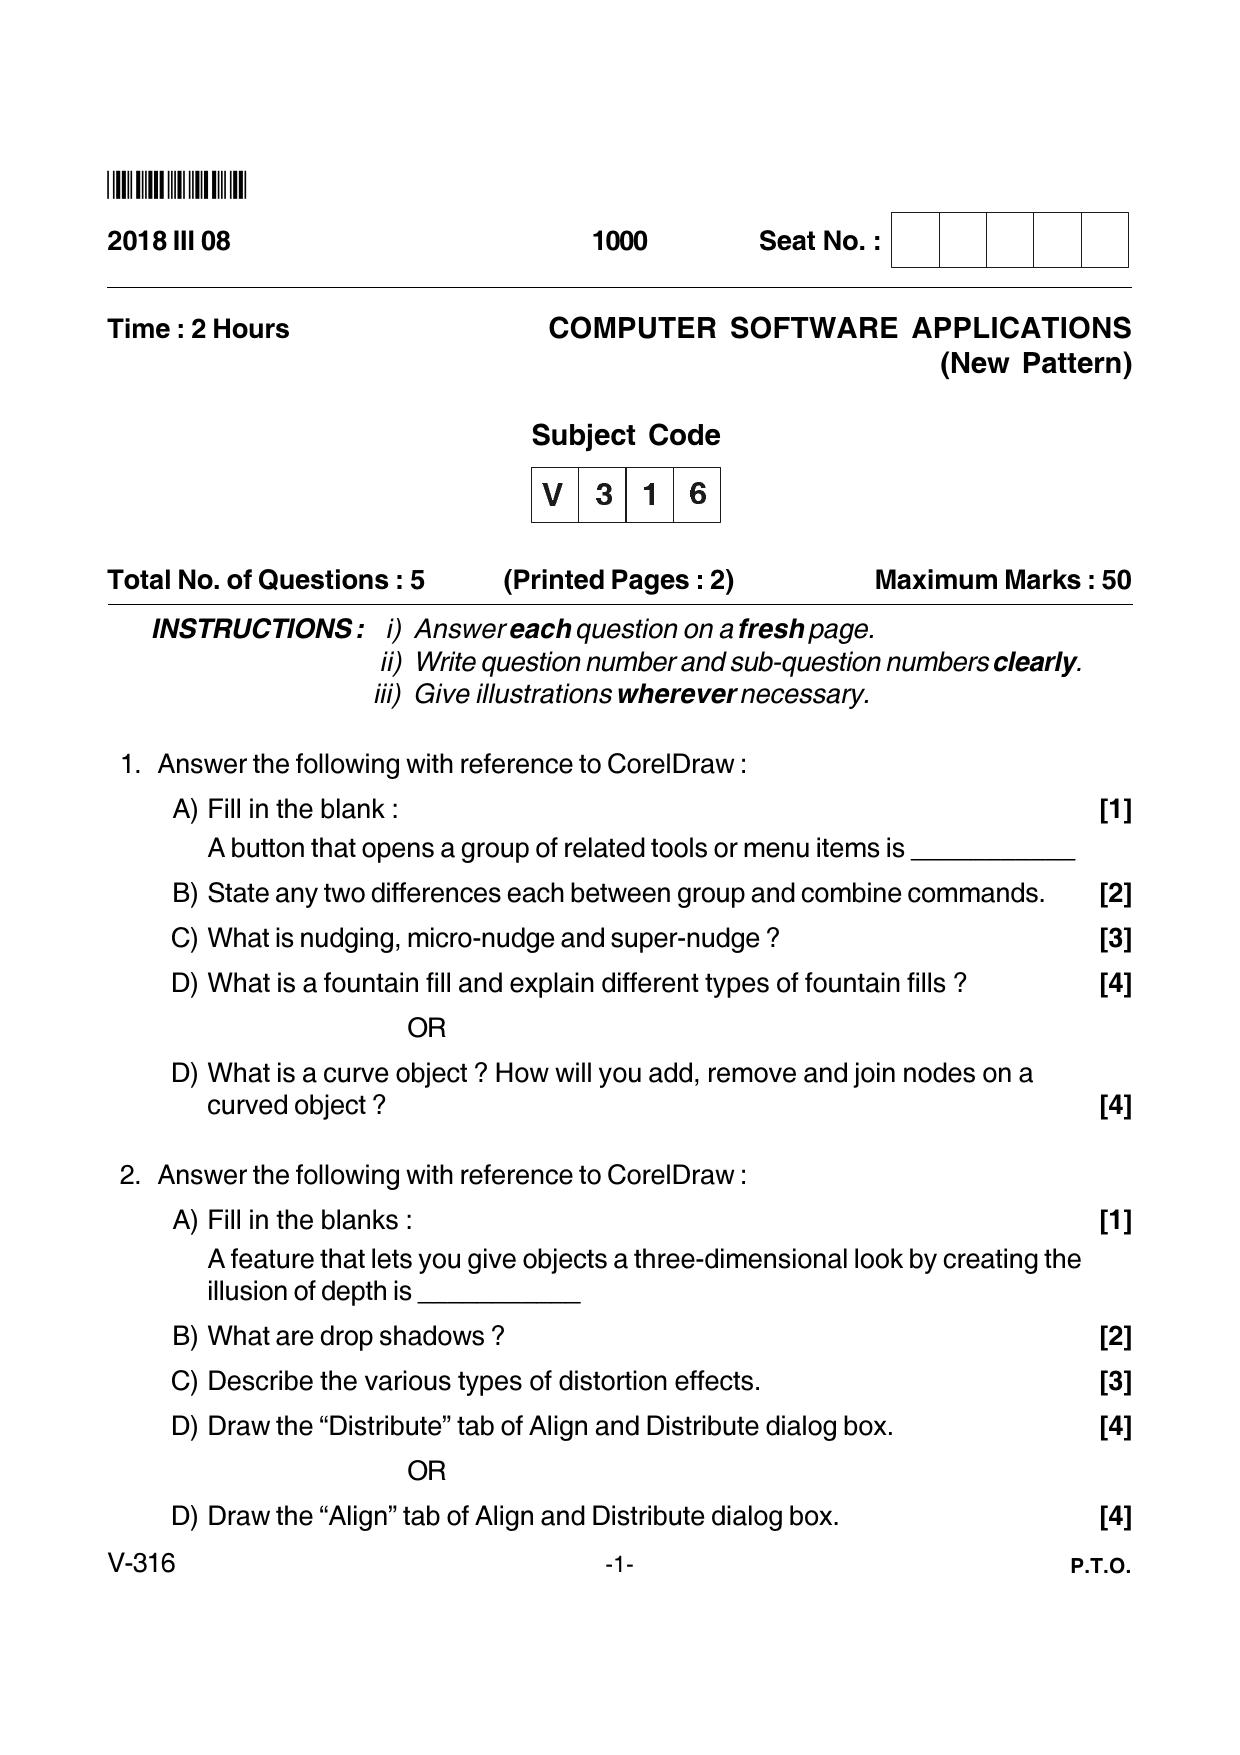 Goa Board Class 12 Computer Software Application  Voc 316 New Pattern (March 2018) Question Paper - Page 1